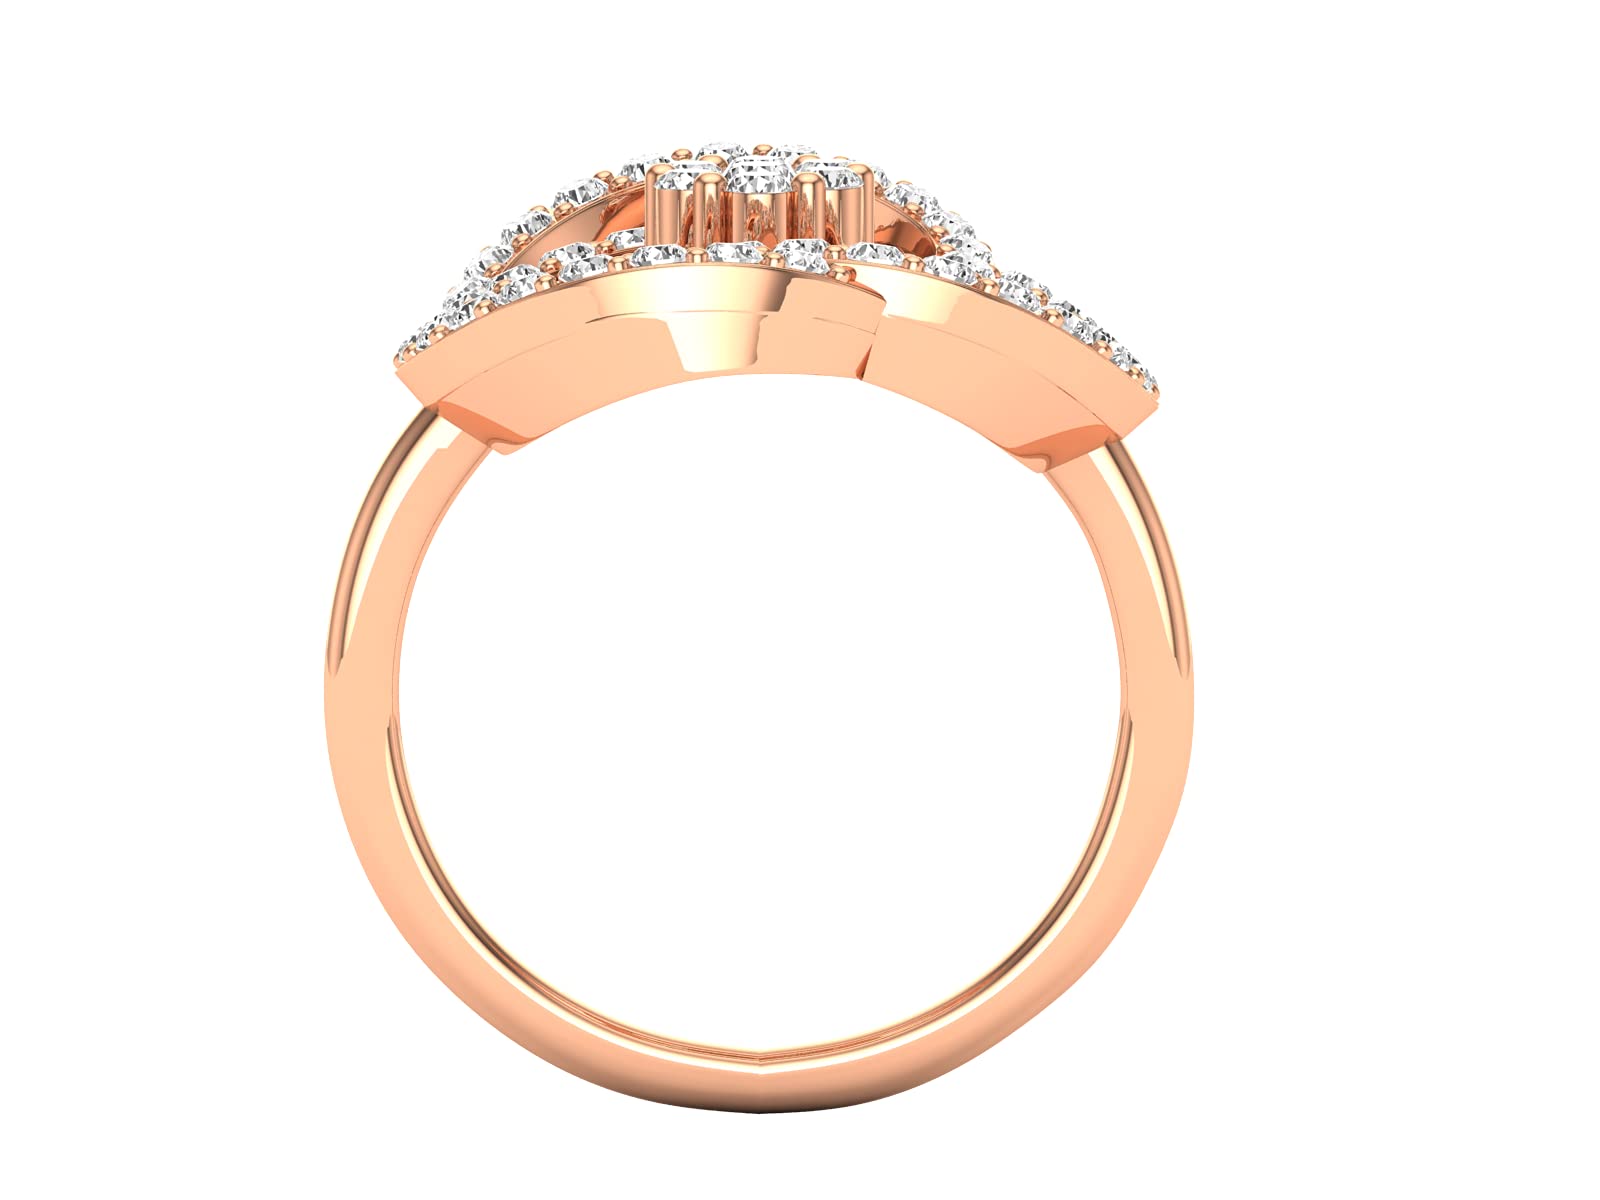 Certified 18K Gold Ring in Round Cut Natural Diamond (0.82 ct) with White/Yellow/Rose Gold Wedding Ring for Women